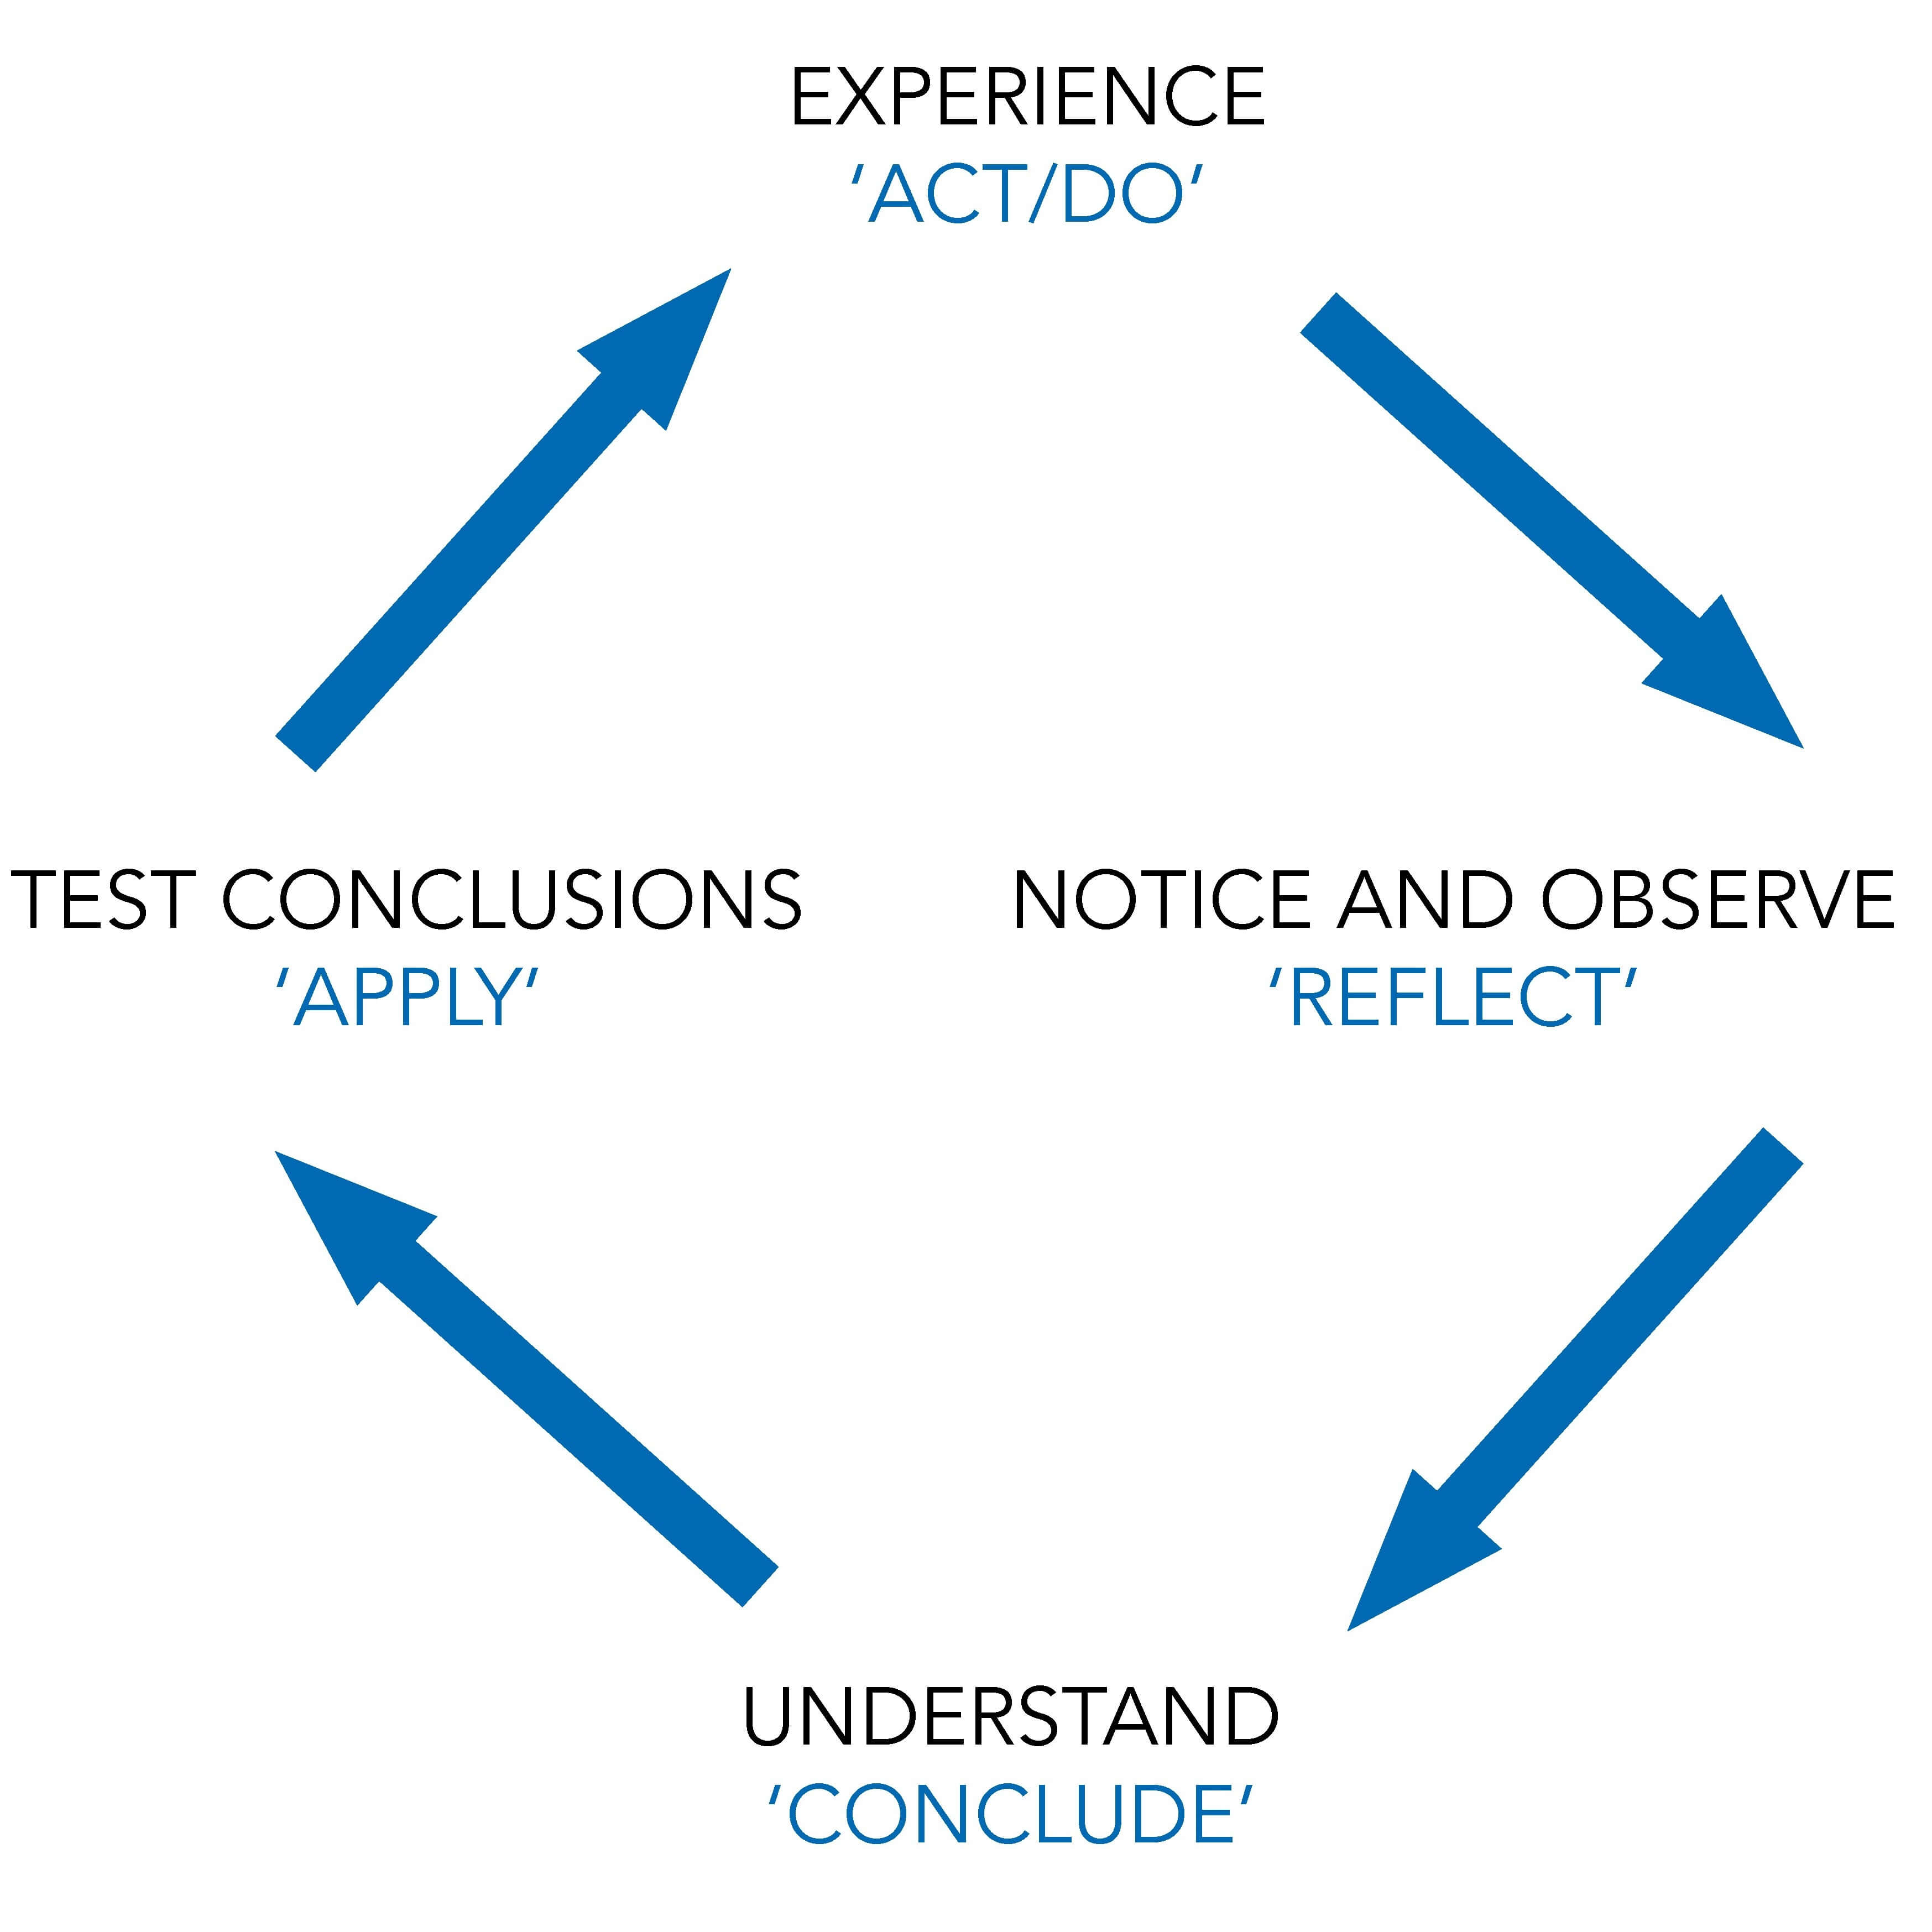 Is the Kolb Experiential Learning Cycle still relevant in this age of instant information?